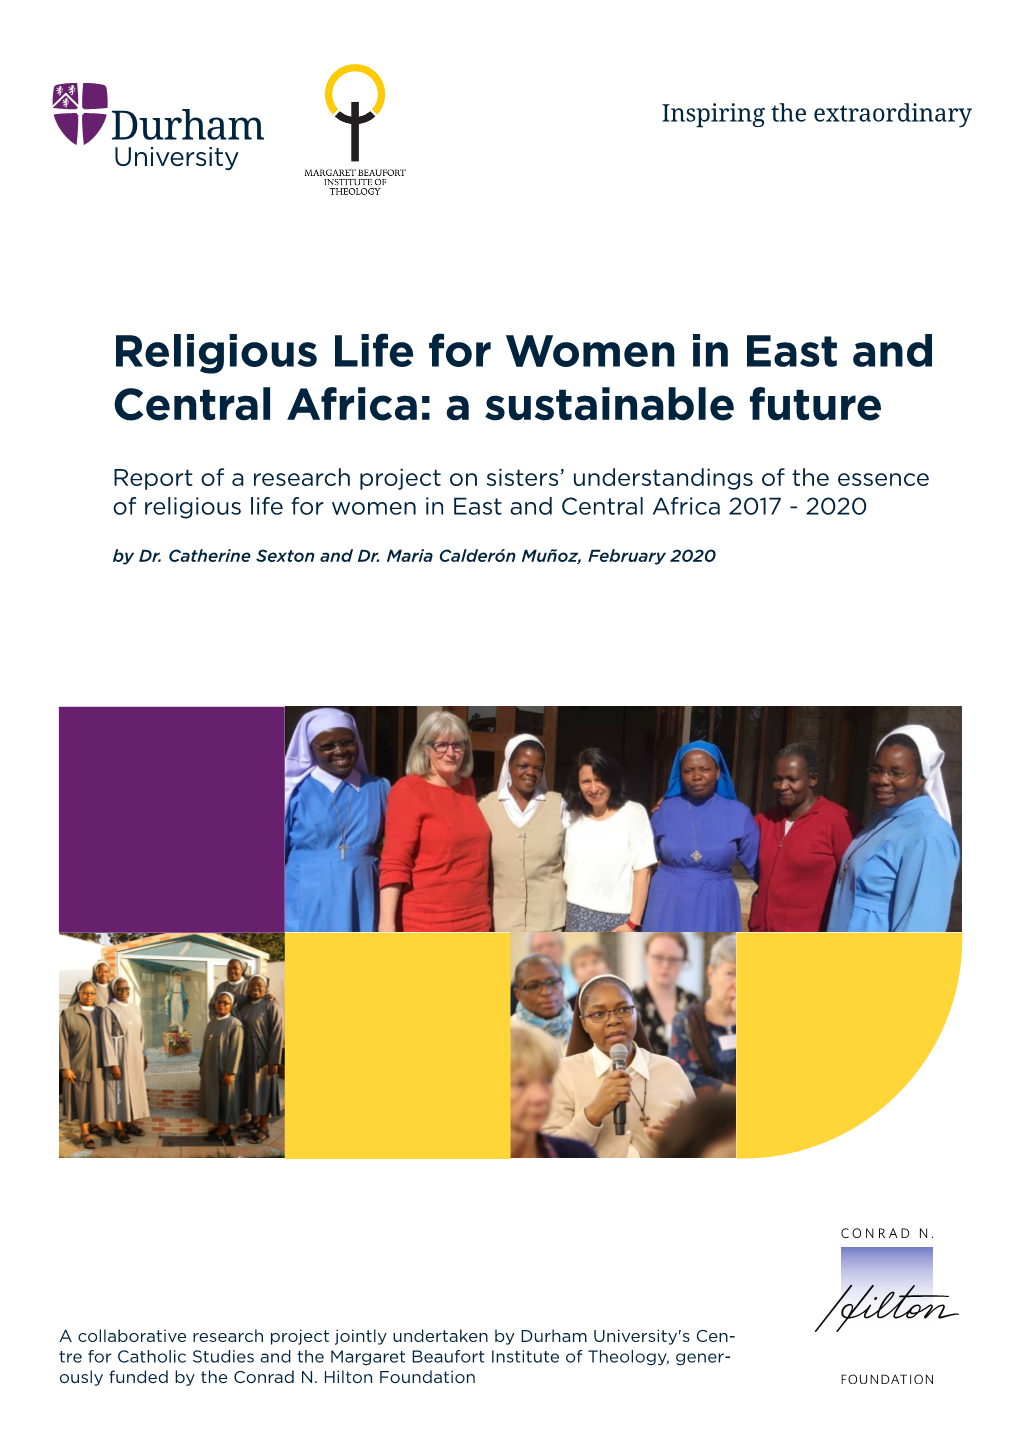 Religious Life for Women in East and Central Africa: a Sustainable Future